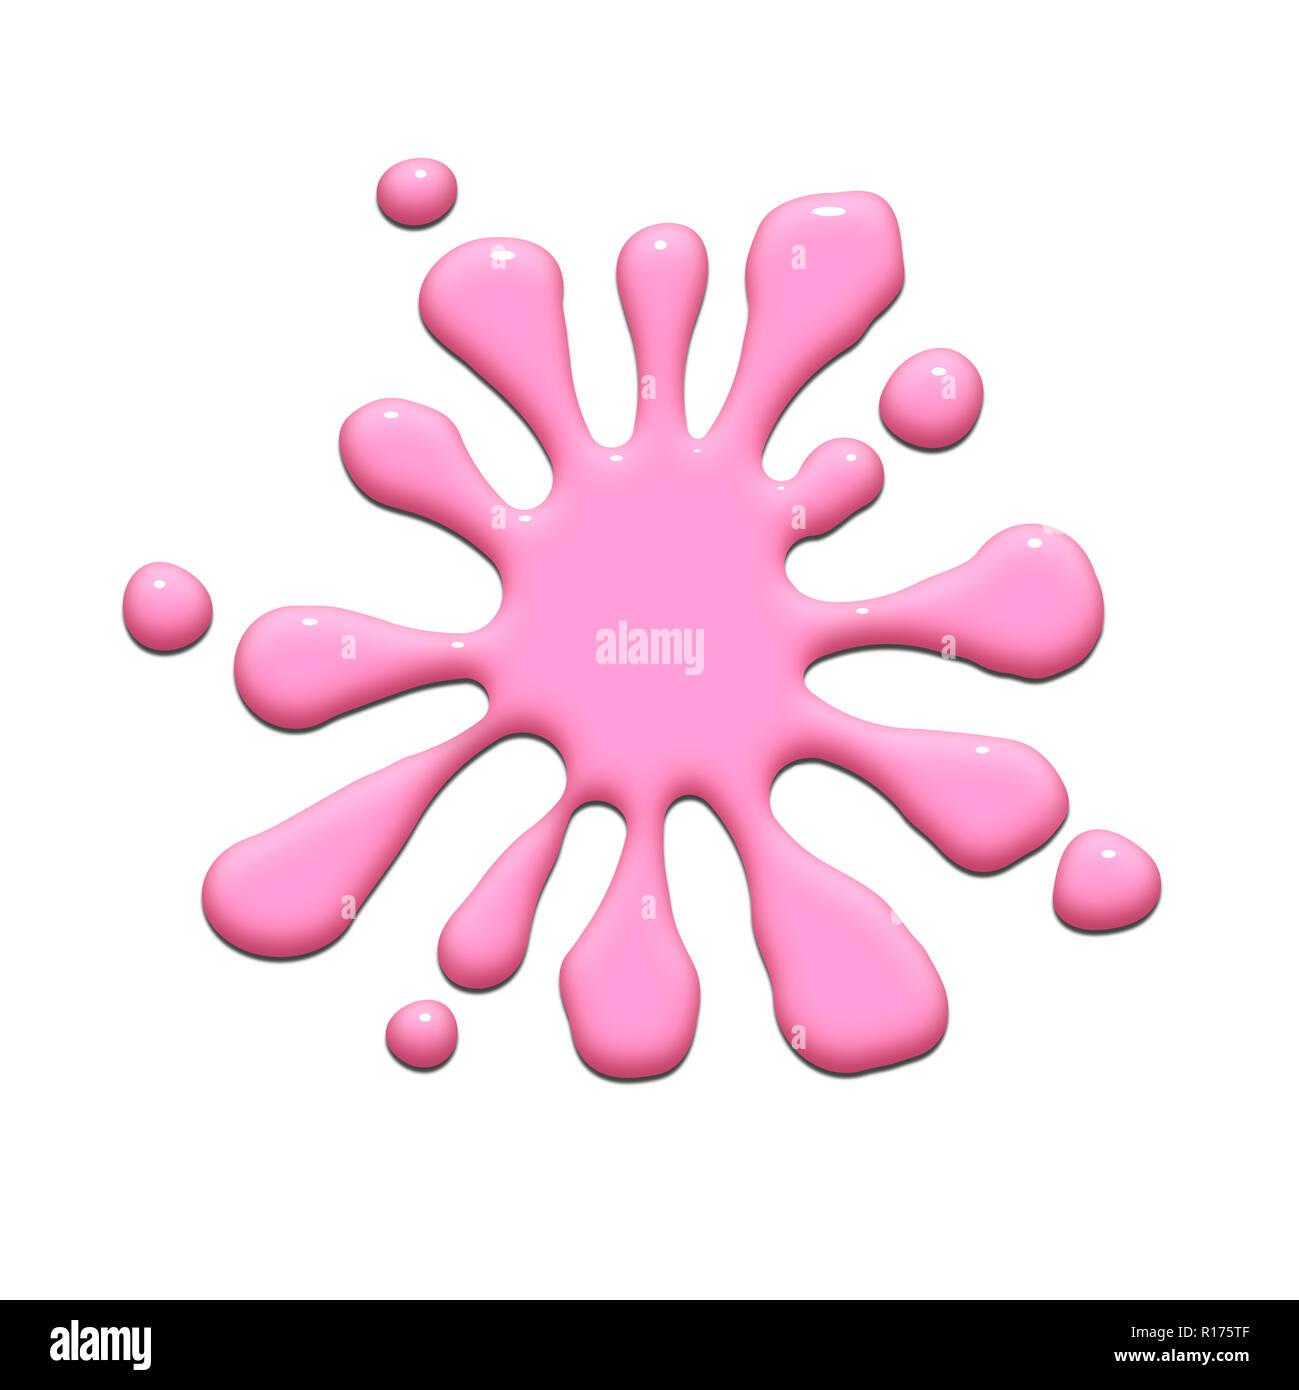 Splatter of pink colour paint, white background Stock Photo